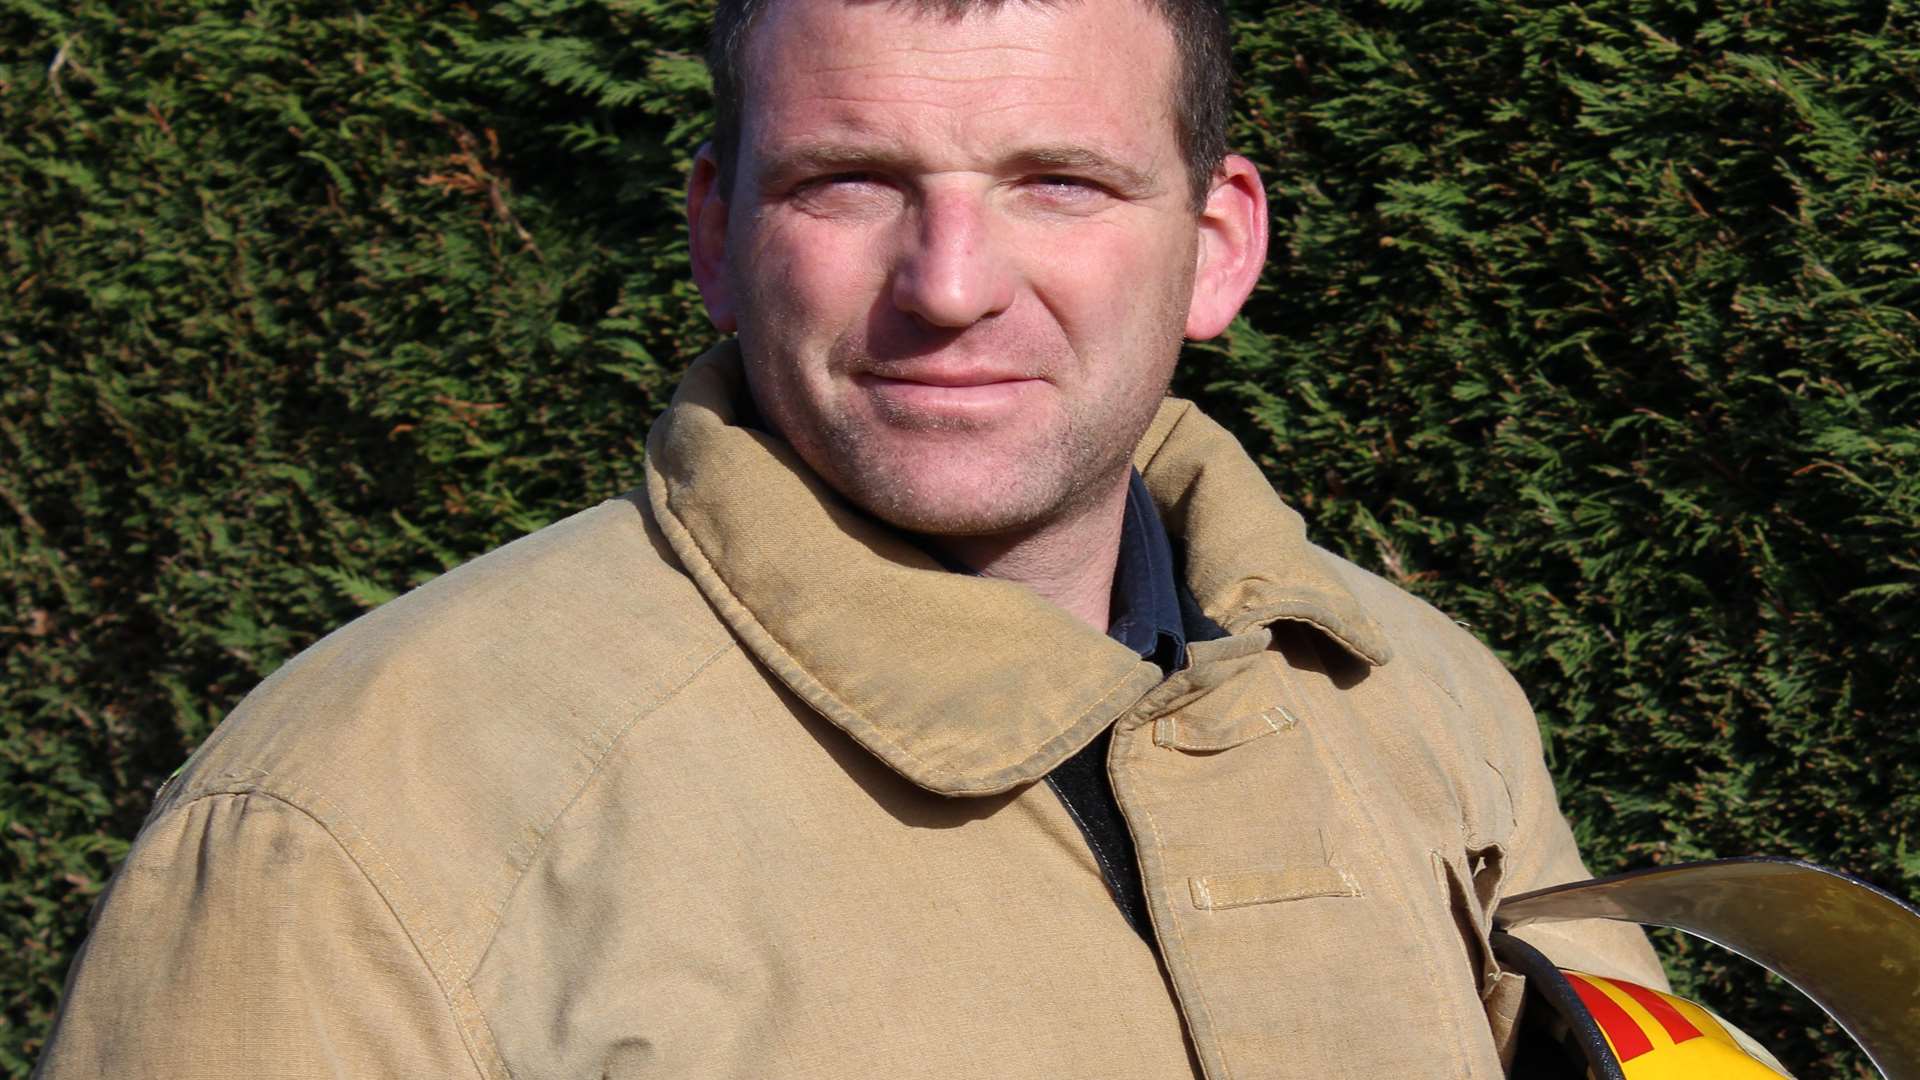 Mr Whittaker is one of 18 members of the Christchurch Fire Service to be put forward for the award